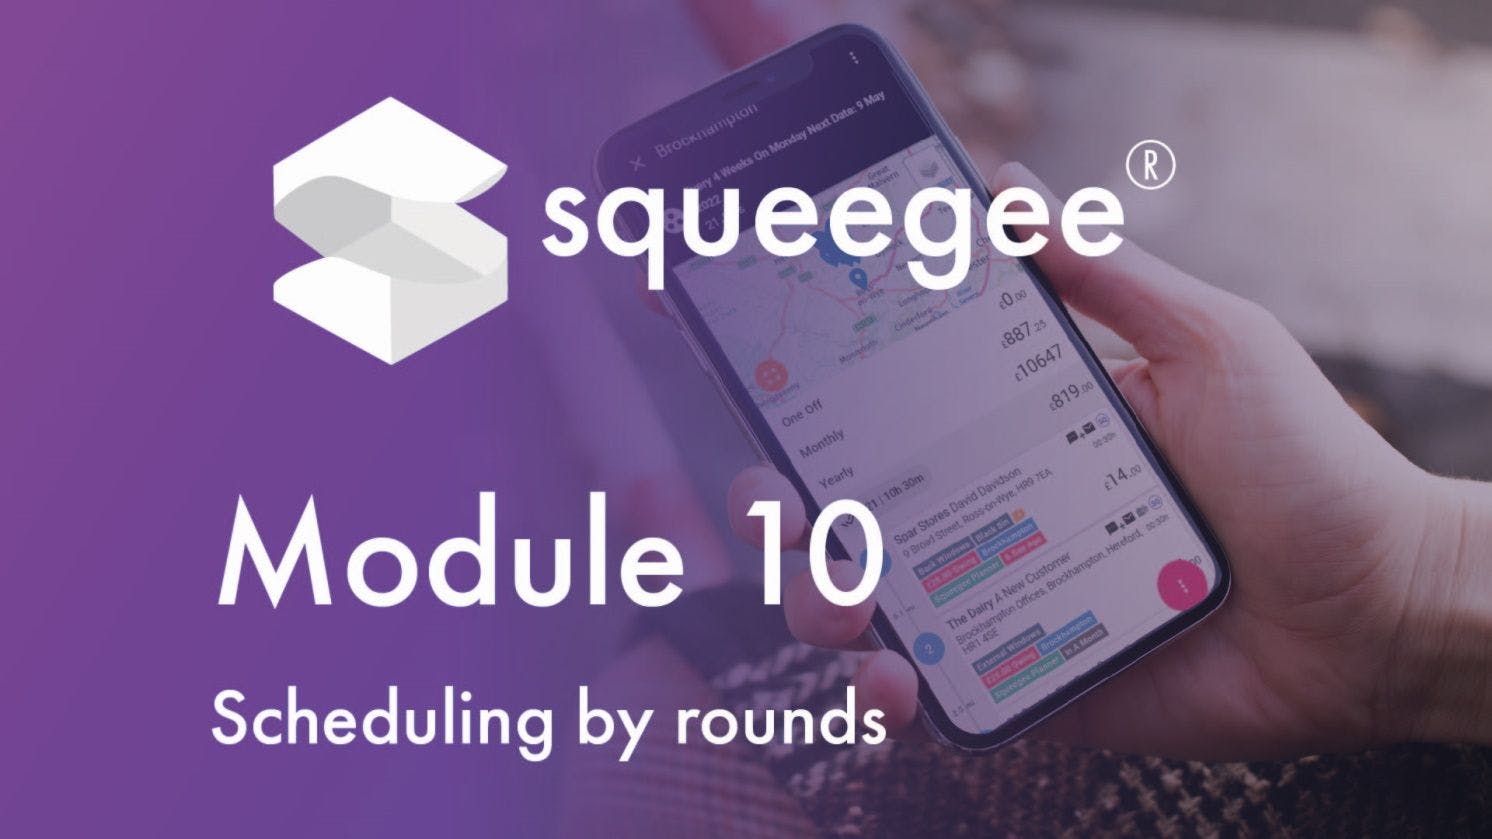 Squeegee Training Academy Module 10 Scheduling by rounds